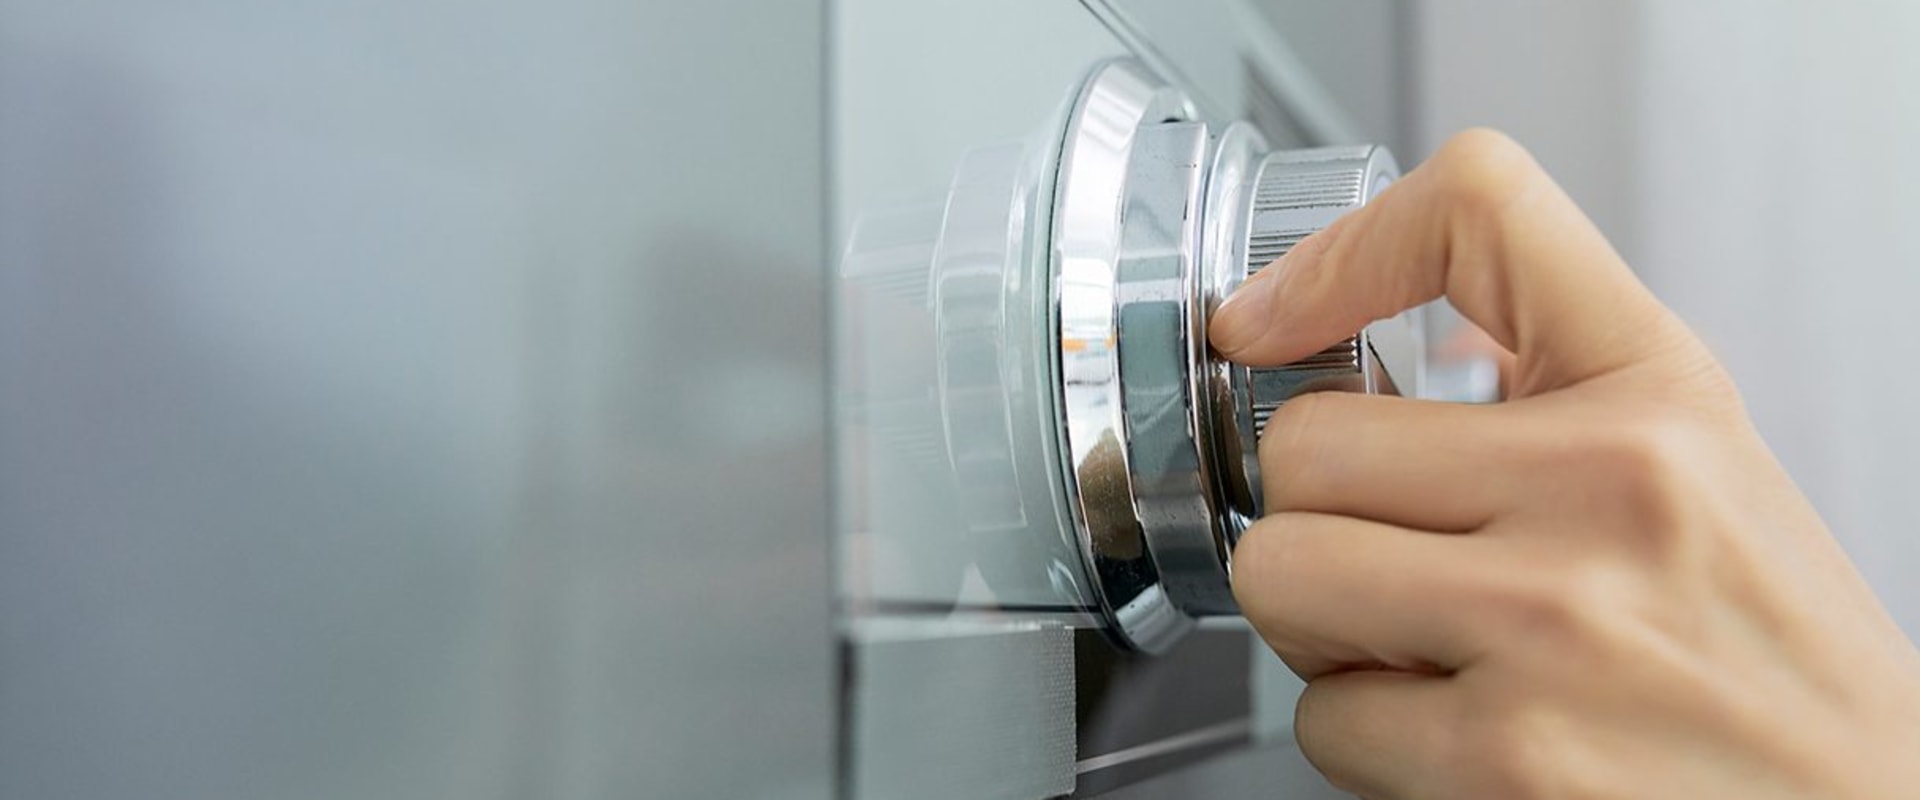 Can a Locksmith Open a Wall Safe?